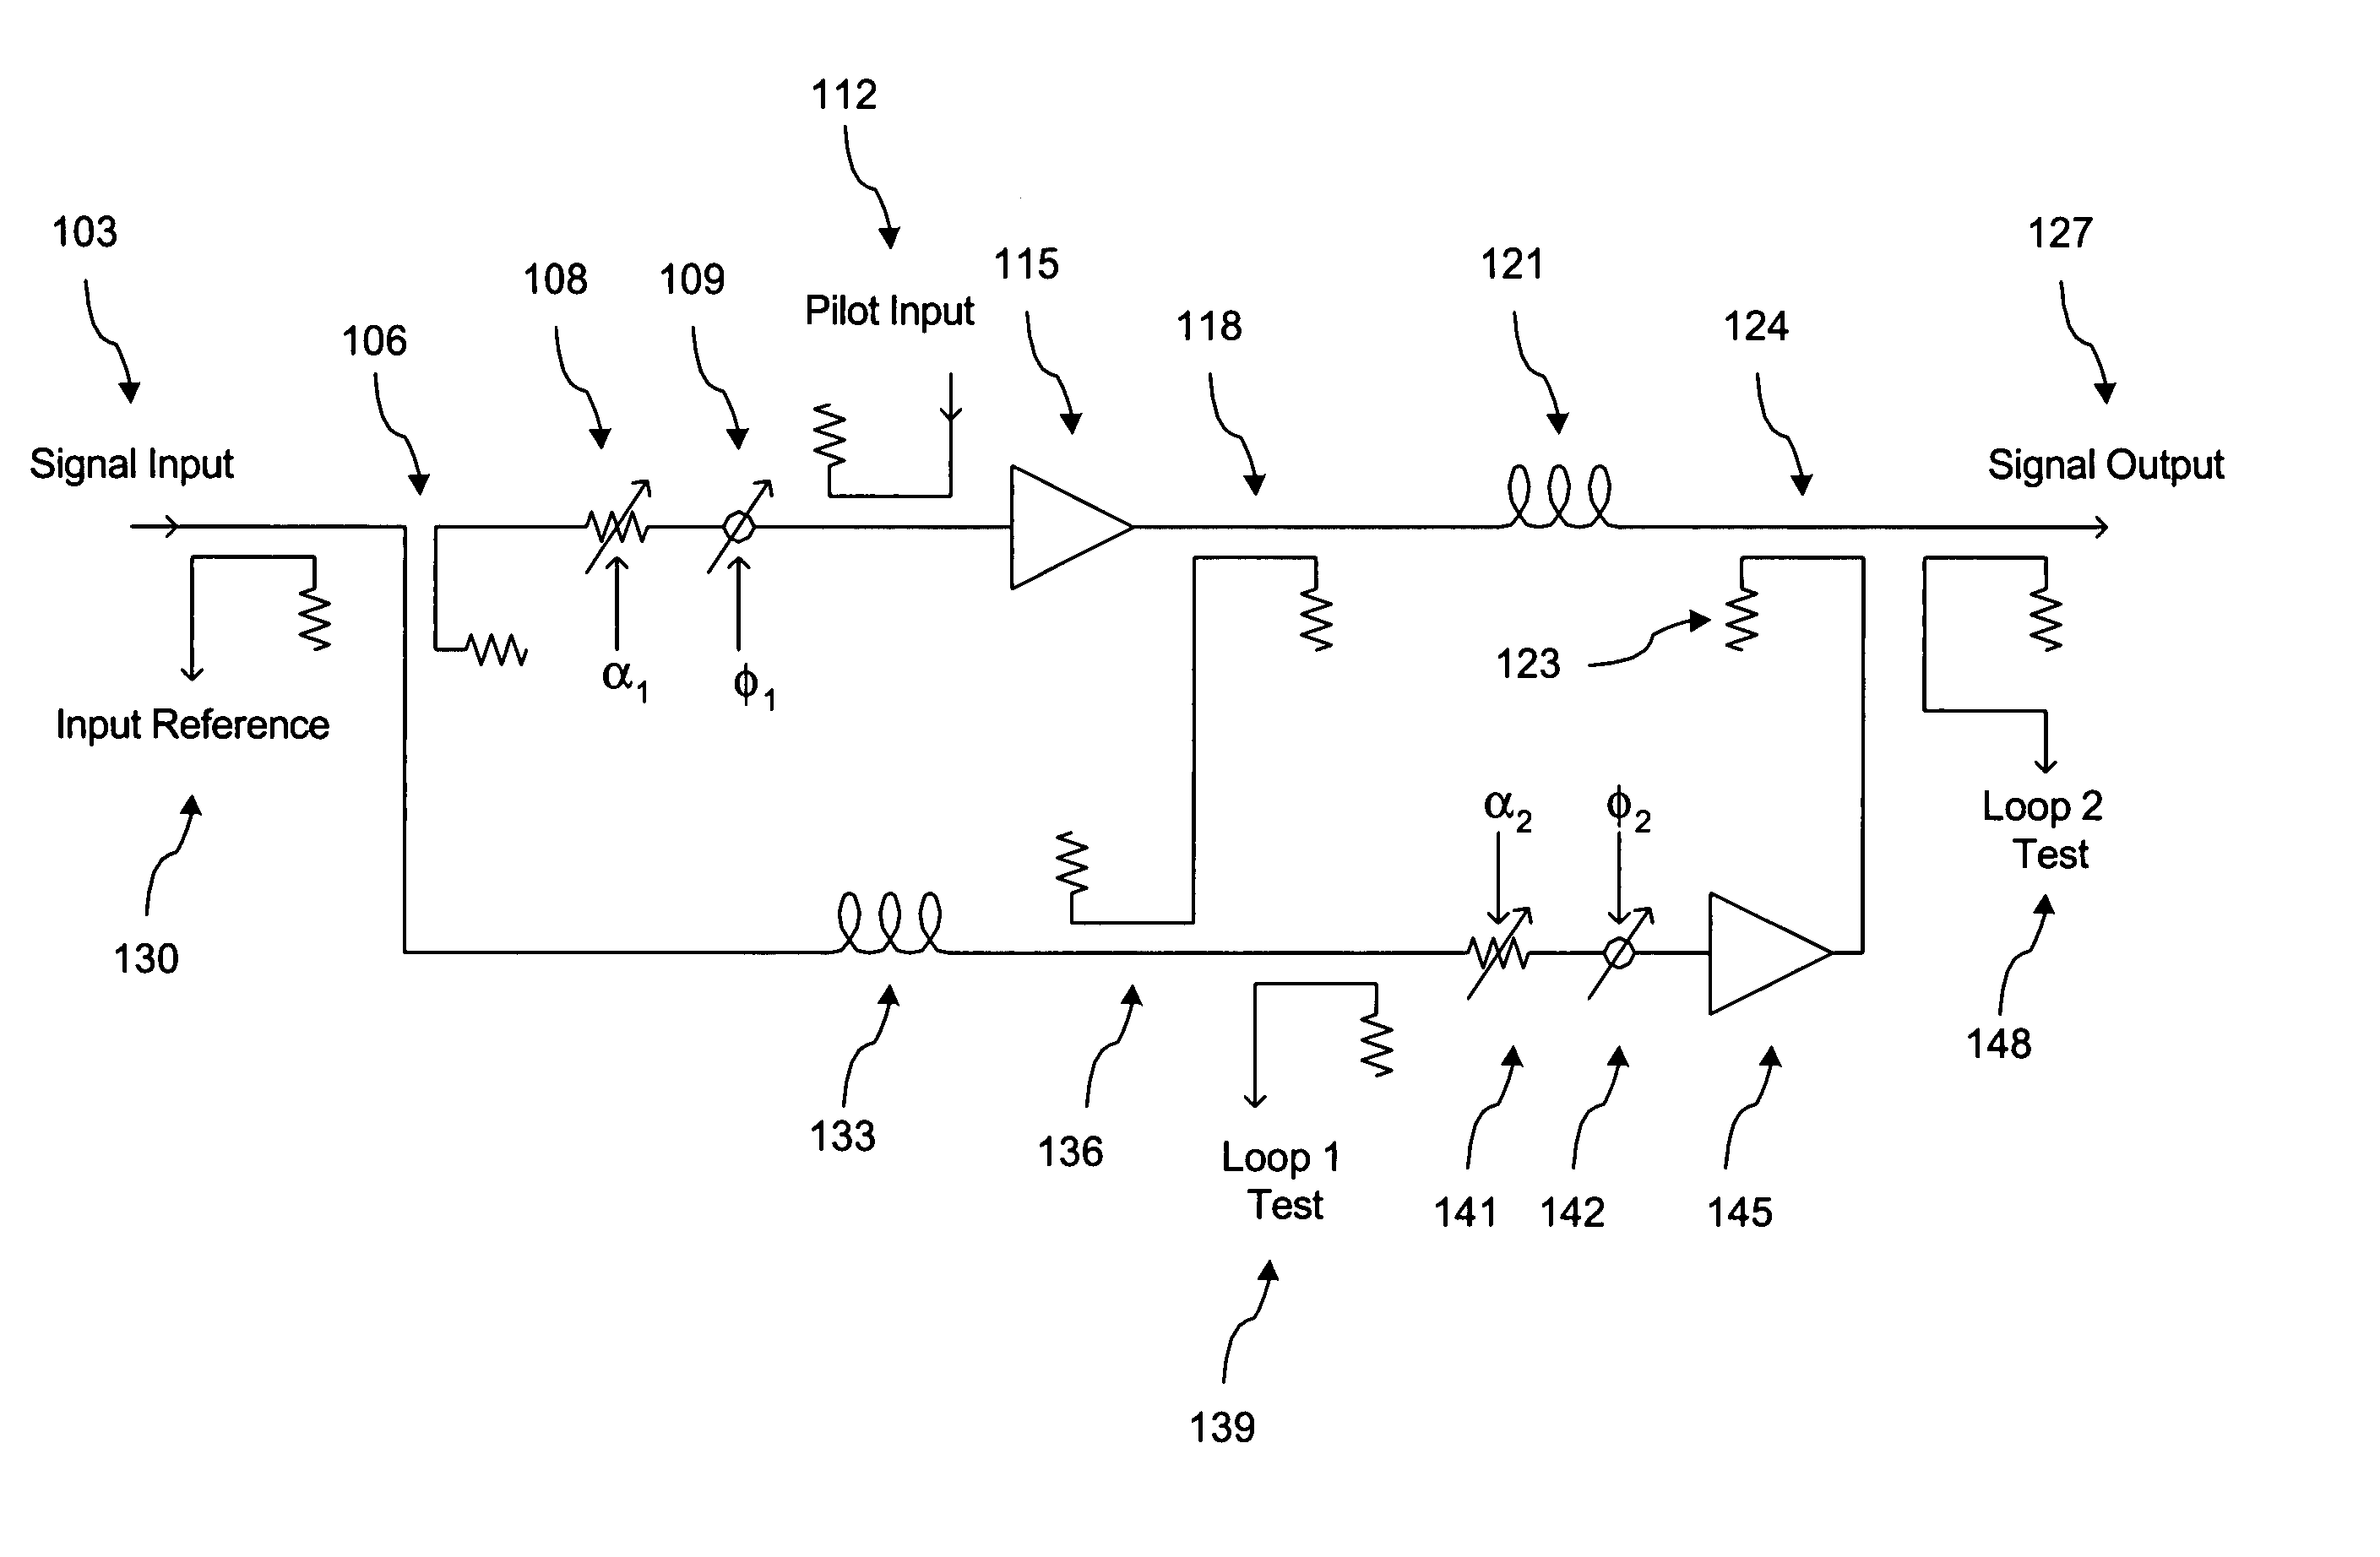 Feed forward amplifier system using penalties and floors for optimal control